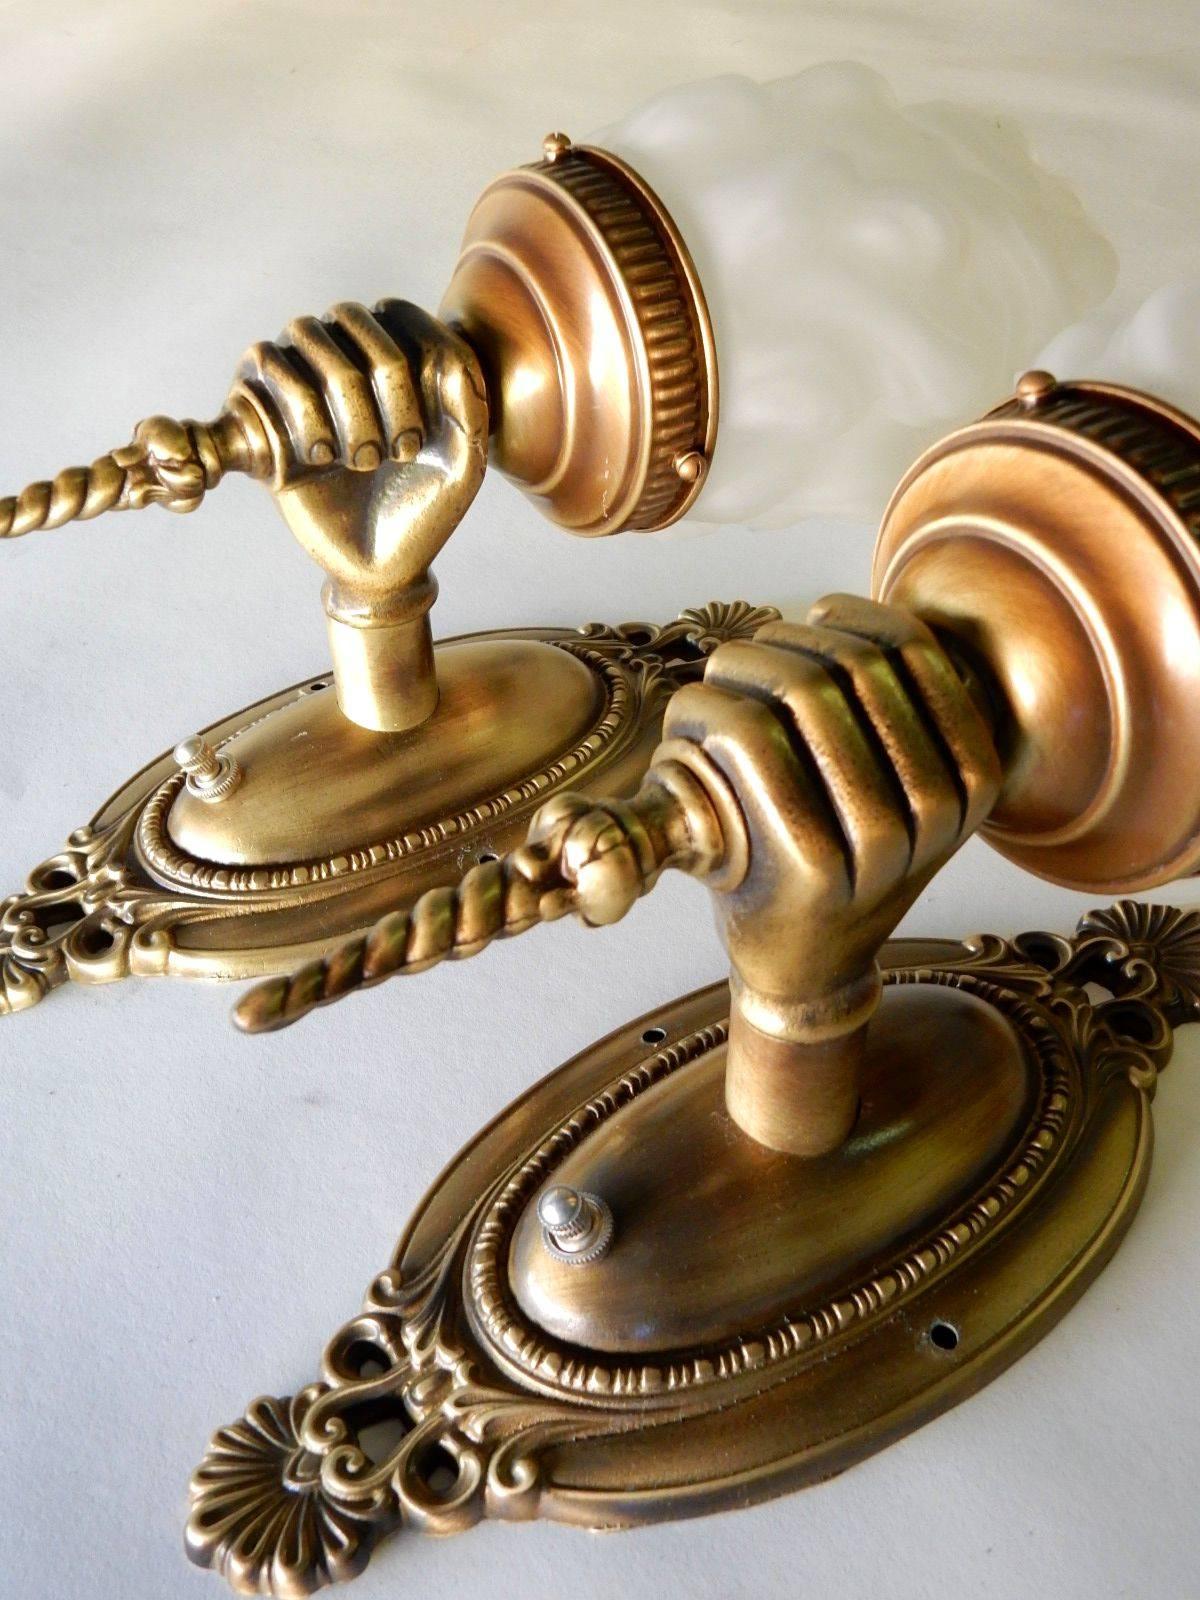 A pair of opposing hand wall sconce lamps circa 1970's.
Brass finish with white glass 